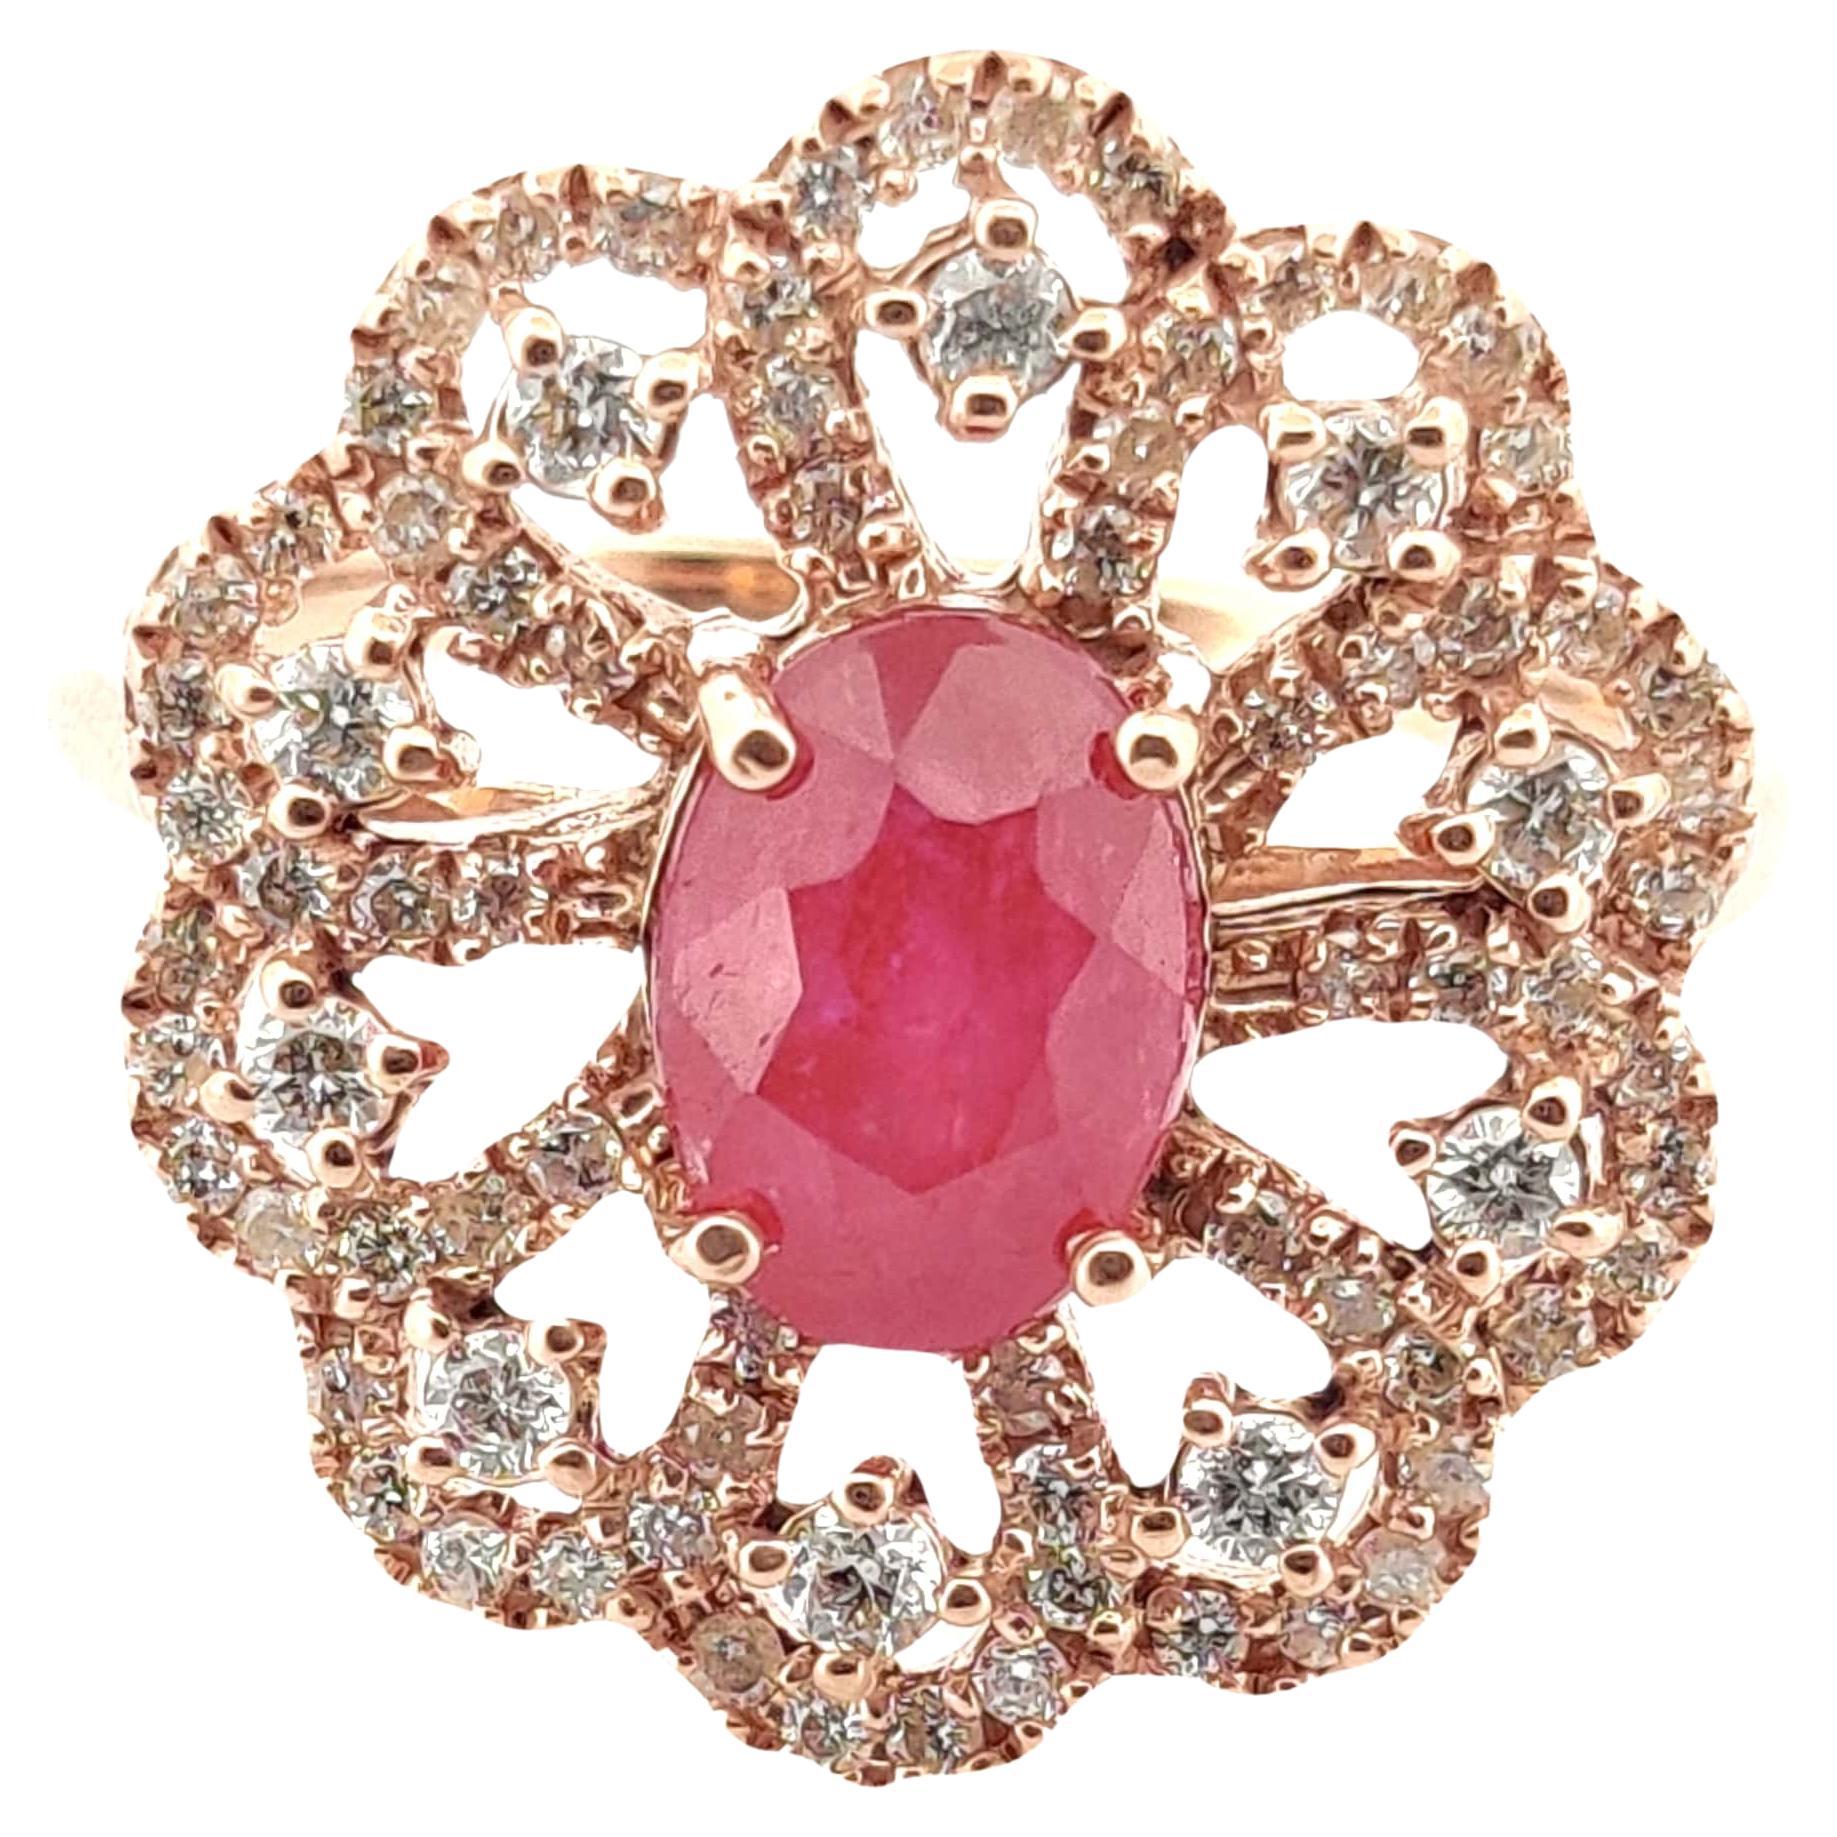 No-Heat 1.49 Ct Pink Ruby & Diamond Fancy Cocktail Ring in 18K Rose Gold